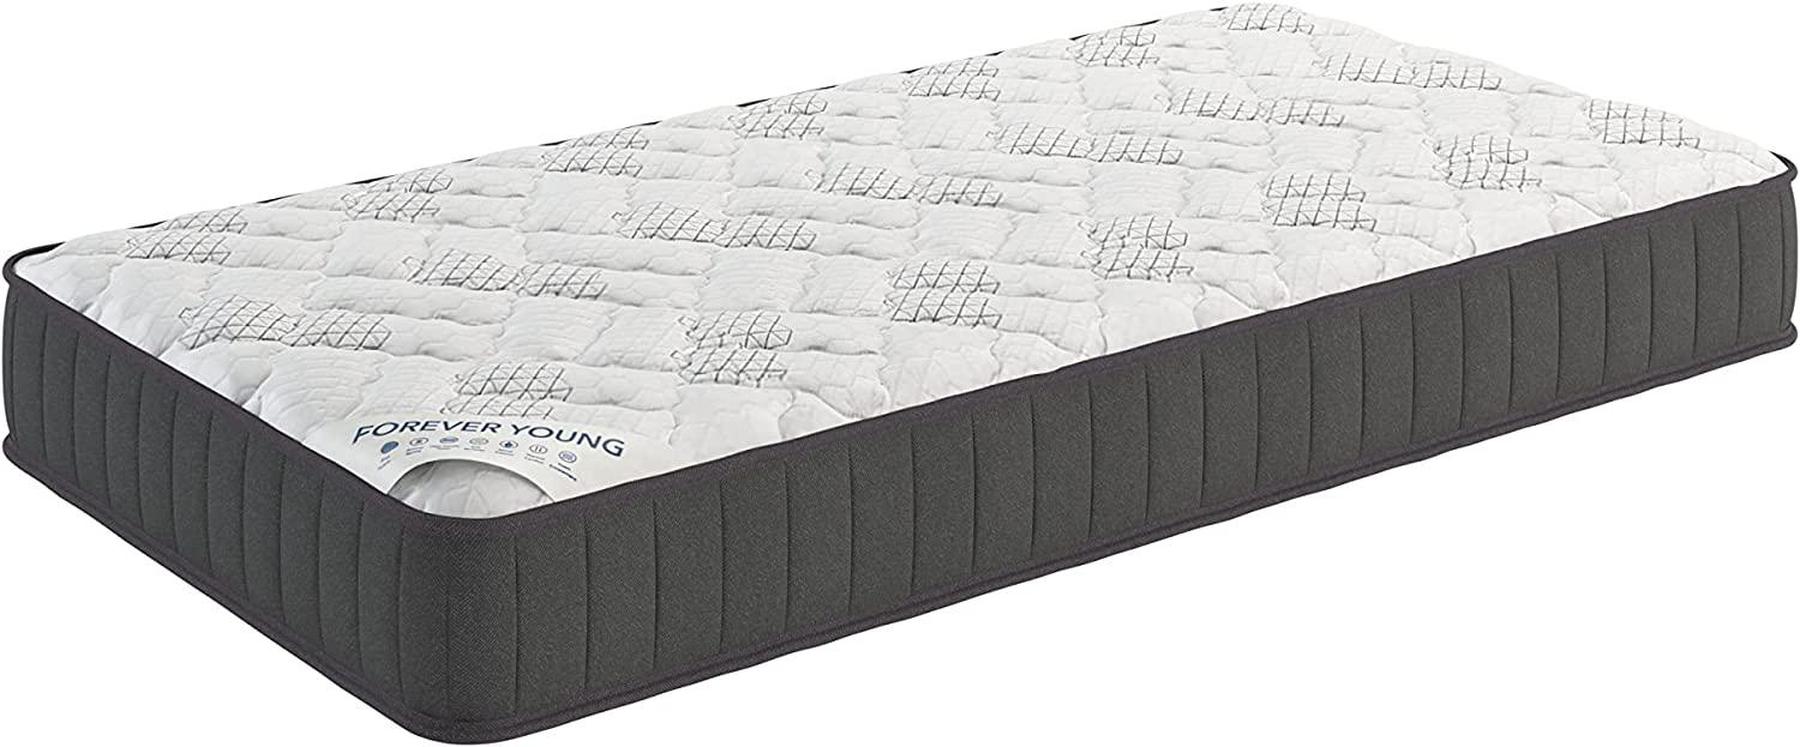 Twin , 9 inch , Firm , Hybrid Mattress with Bonnell Coil core from Bonelli Essentials by Ottomanson in white background.